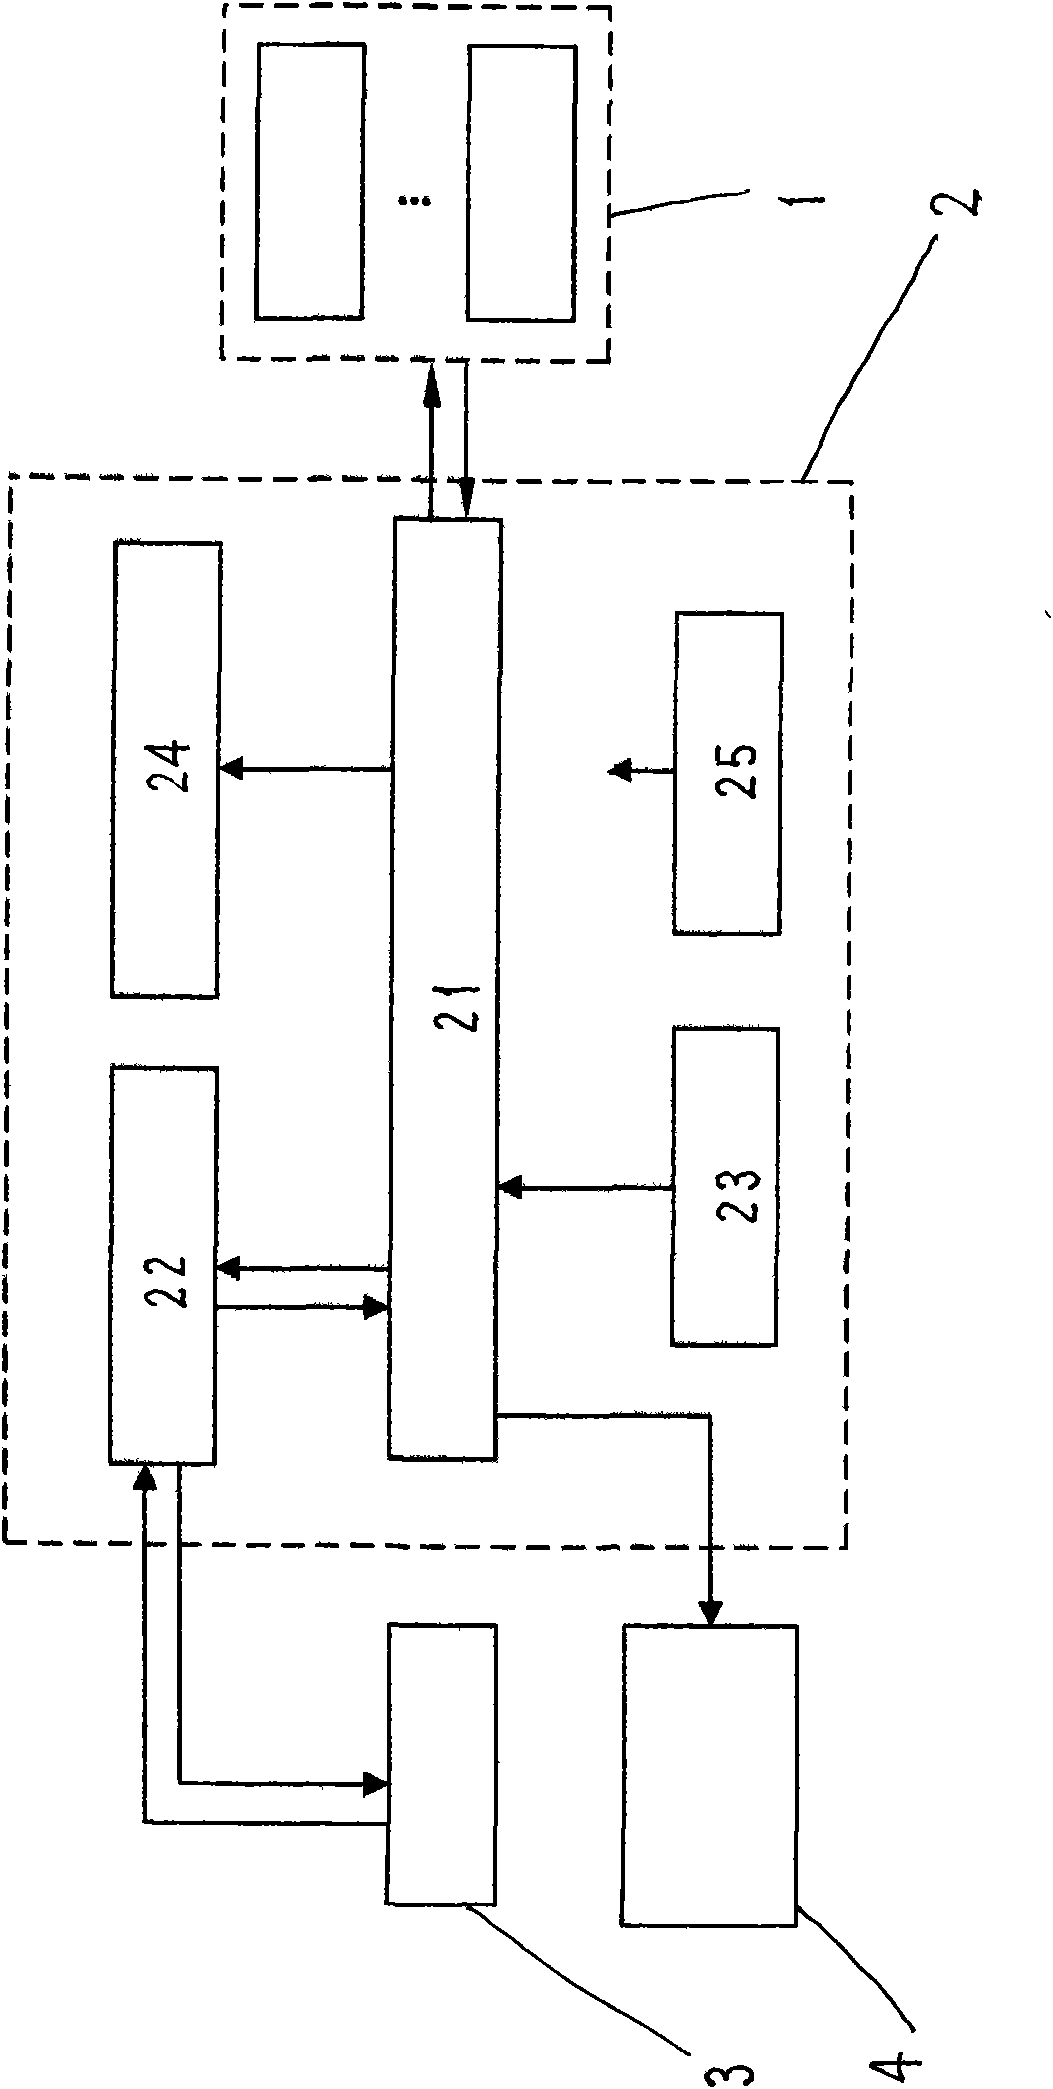 Embedded type power station monitoring device for total electric propulsion ship